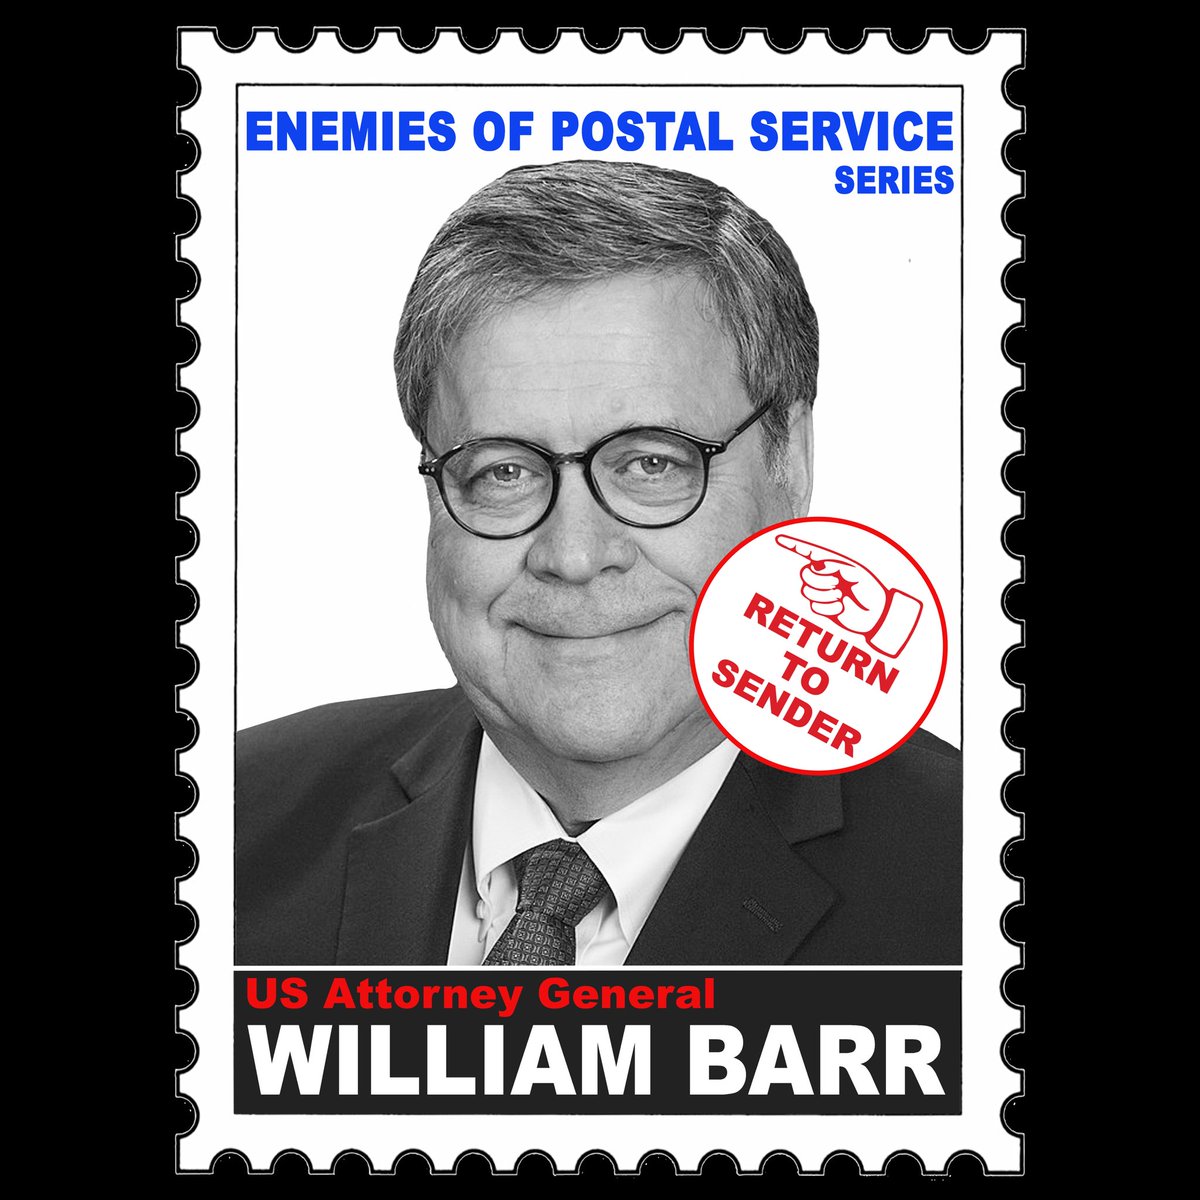 Barr admits to having no evidence to his claim that foreign actors could flood the elections with millions of counterfeit ballots. He voted by mail himself last year.       /6